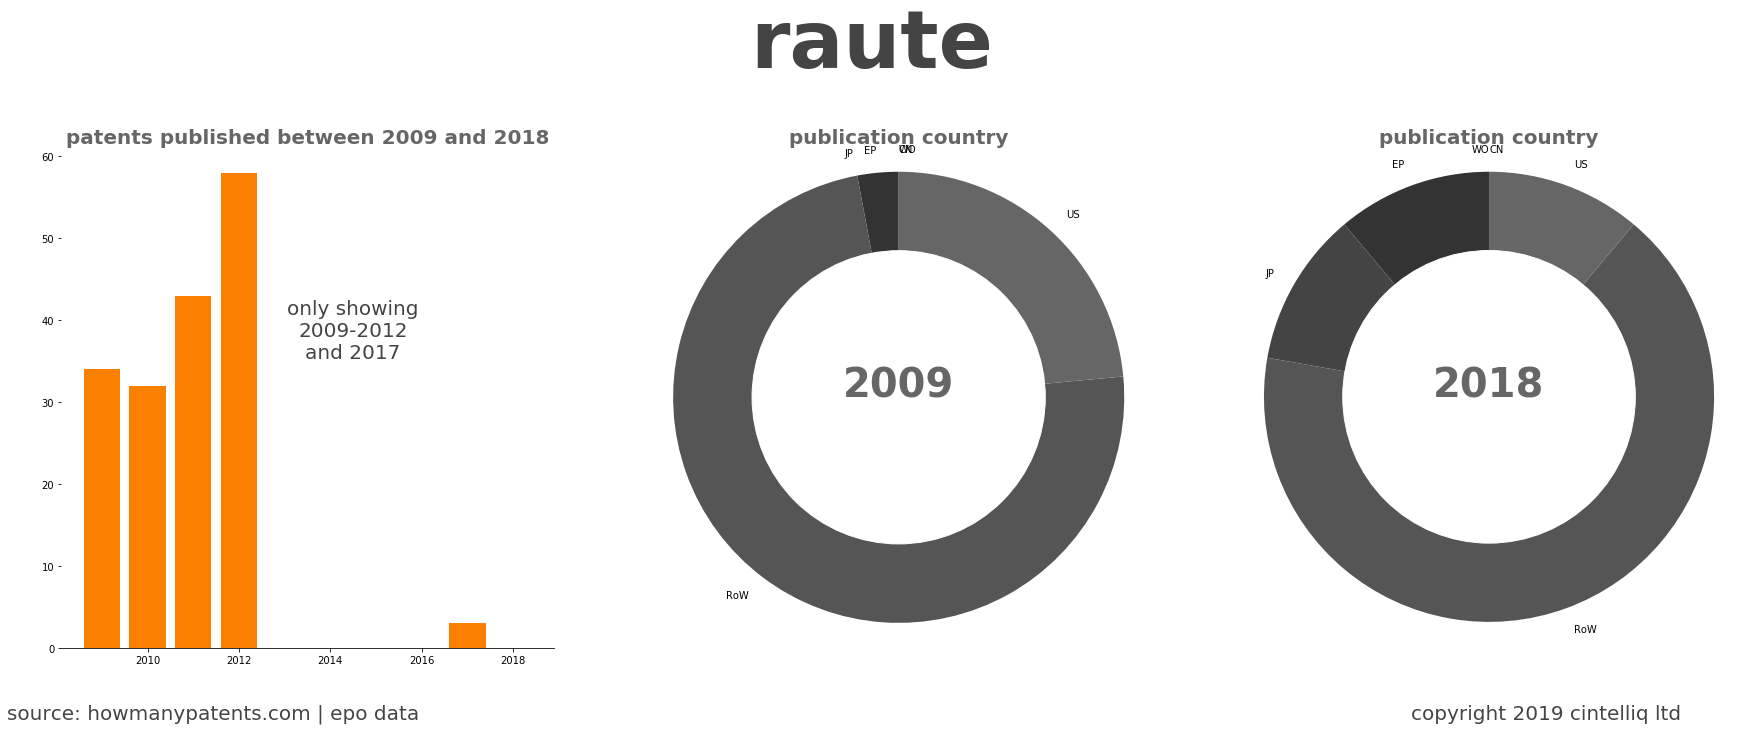 summary of patents for Raute